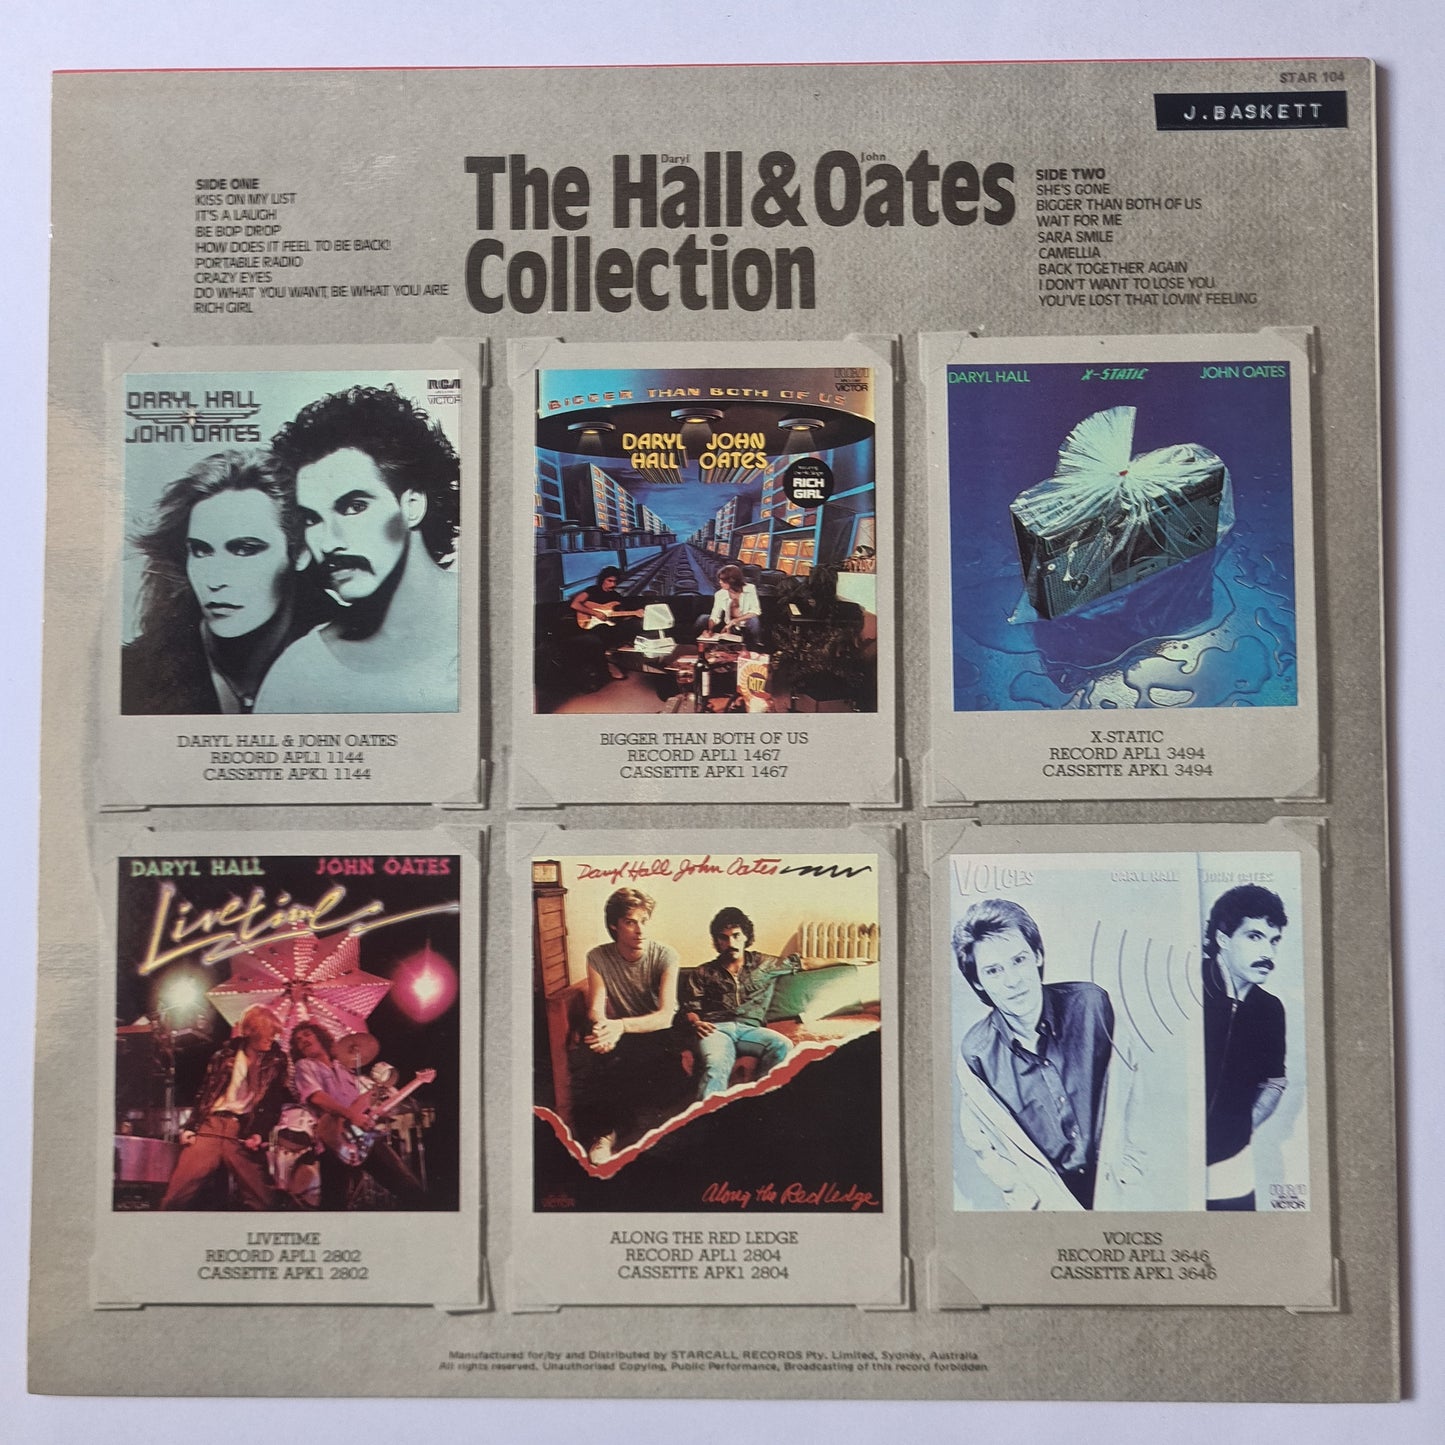 Hall & Oates – The Hall & Oates Collection: 16 Tracks - 1981 - Vinyl Record